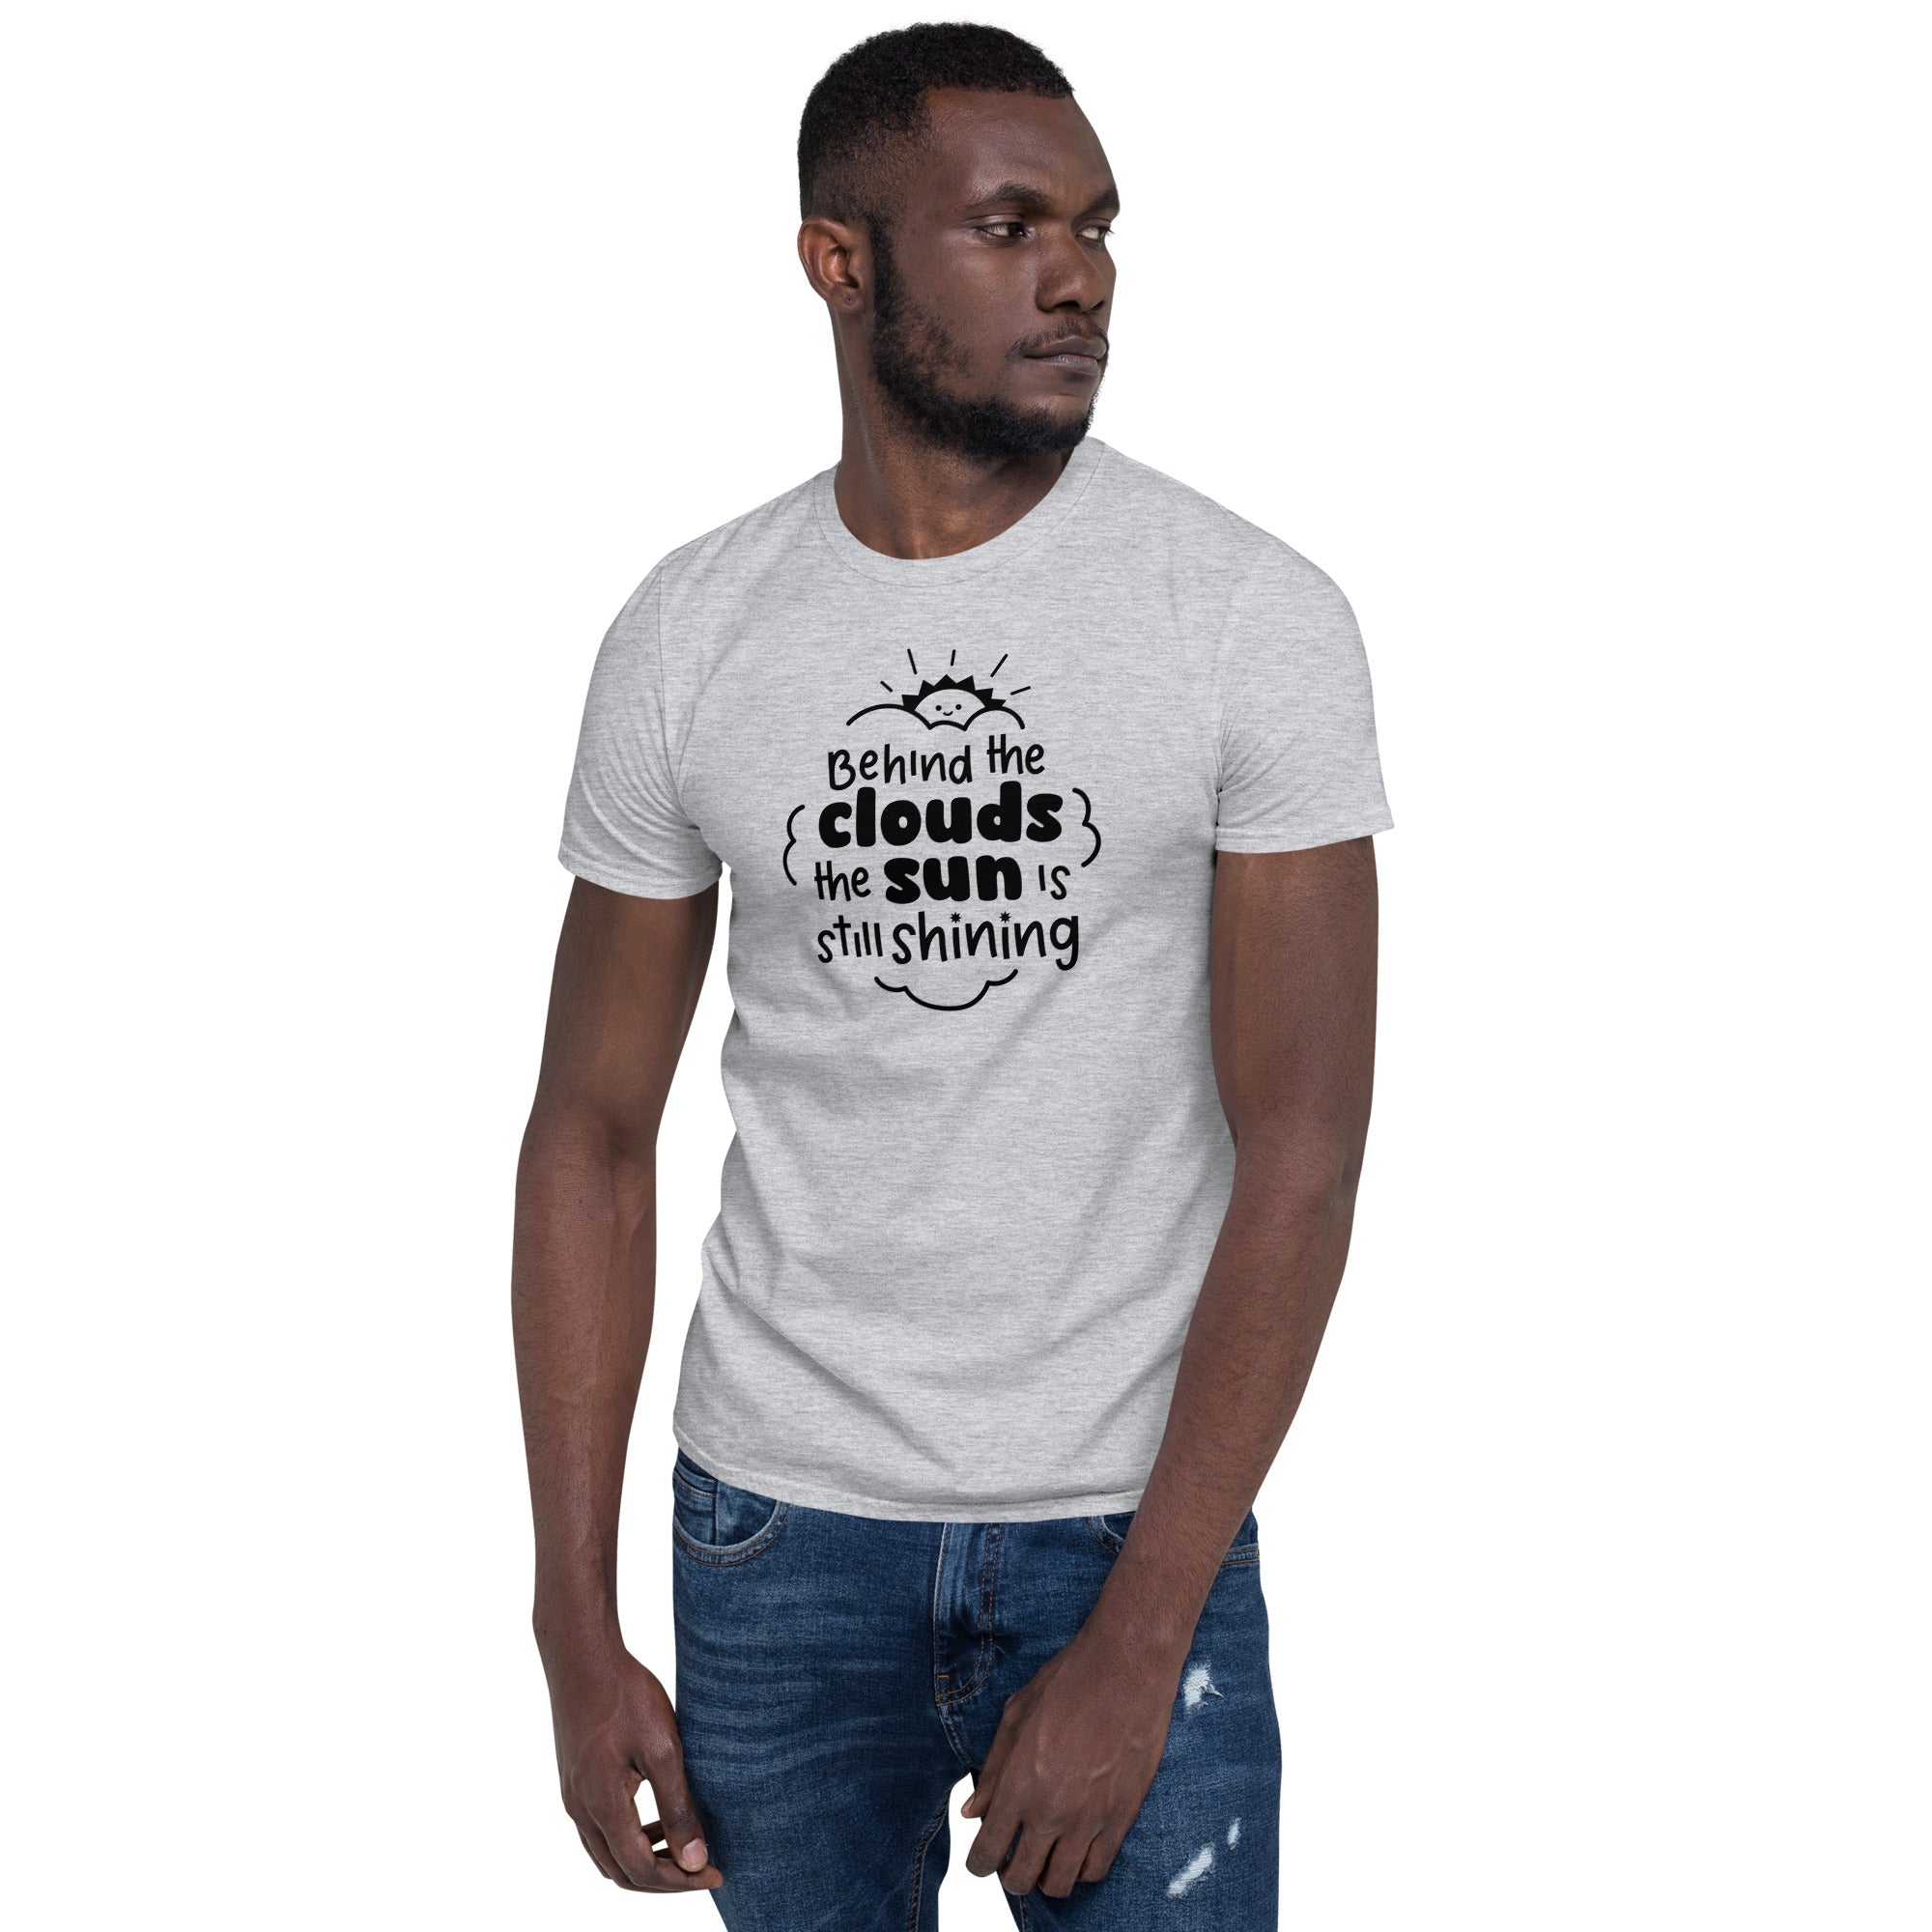 Behind the Clouds - Short-Sleeve Unisex T-Shirt